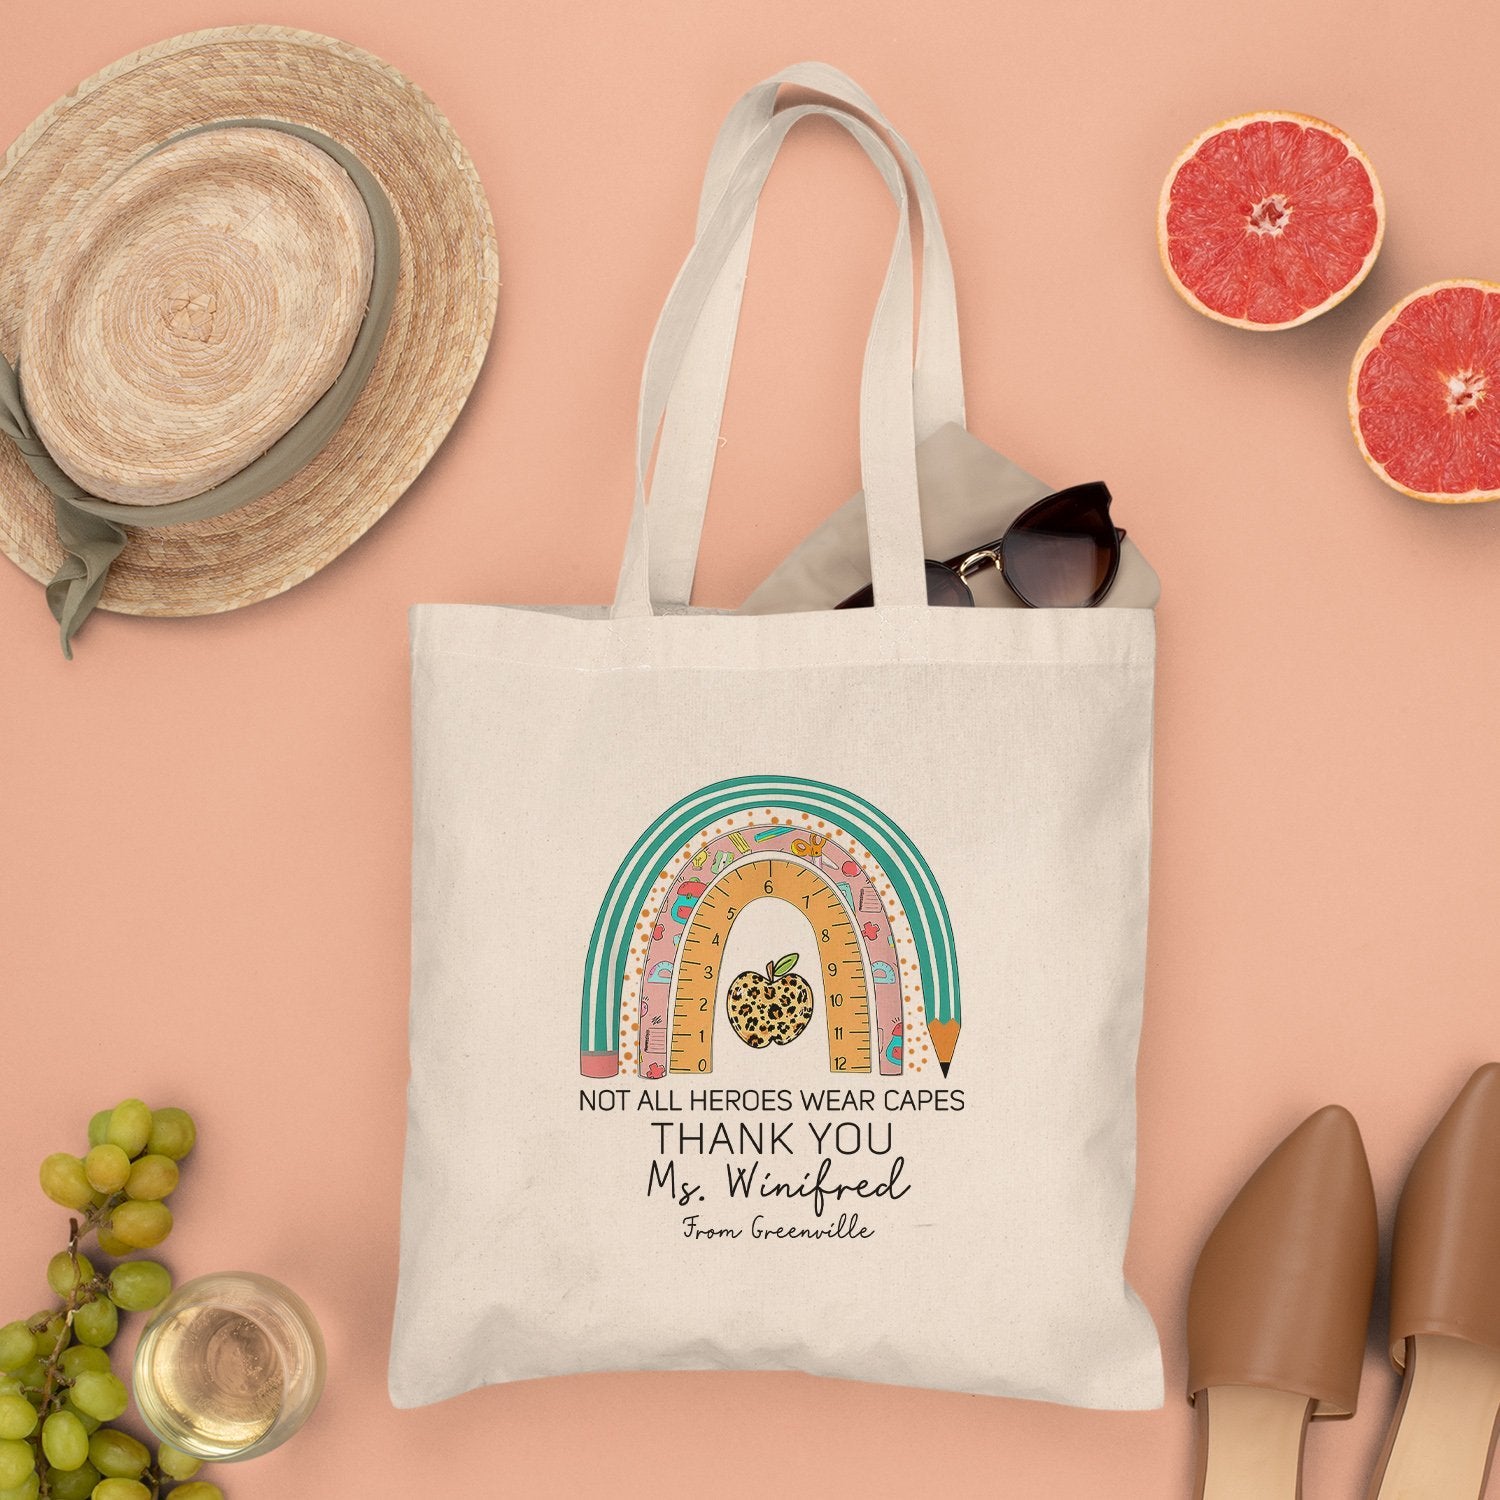 Not All Heroes Wear Capes, Thank You, Custom Tote Bag, Rainbow Art